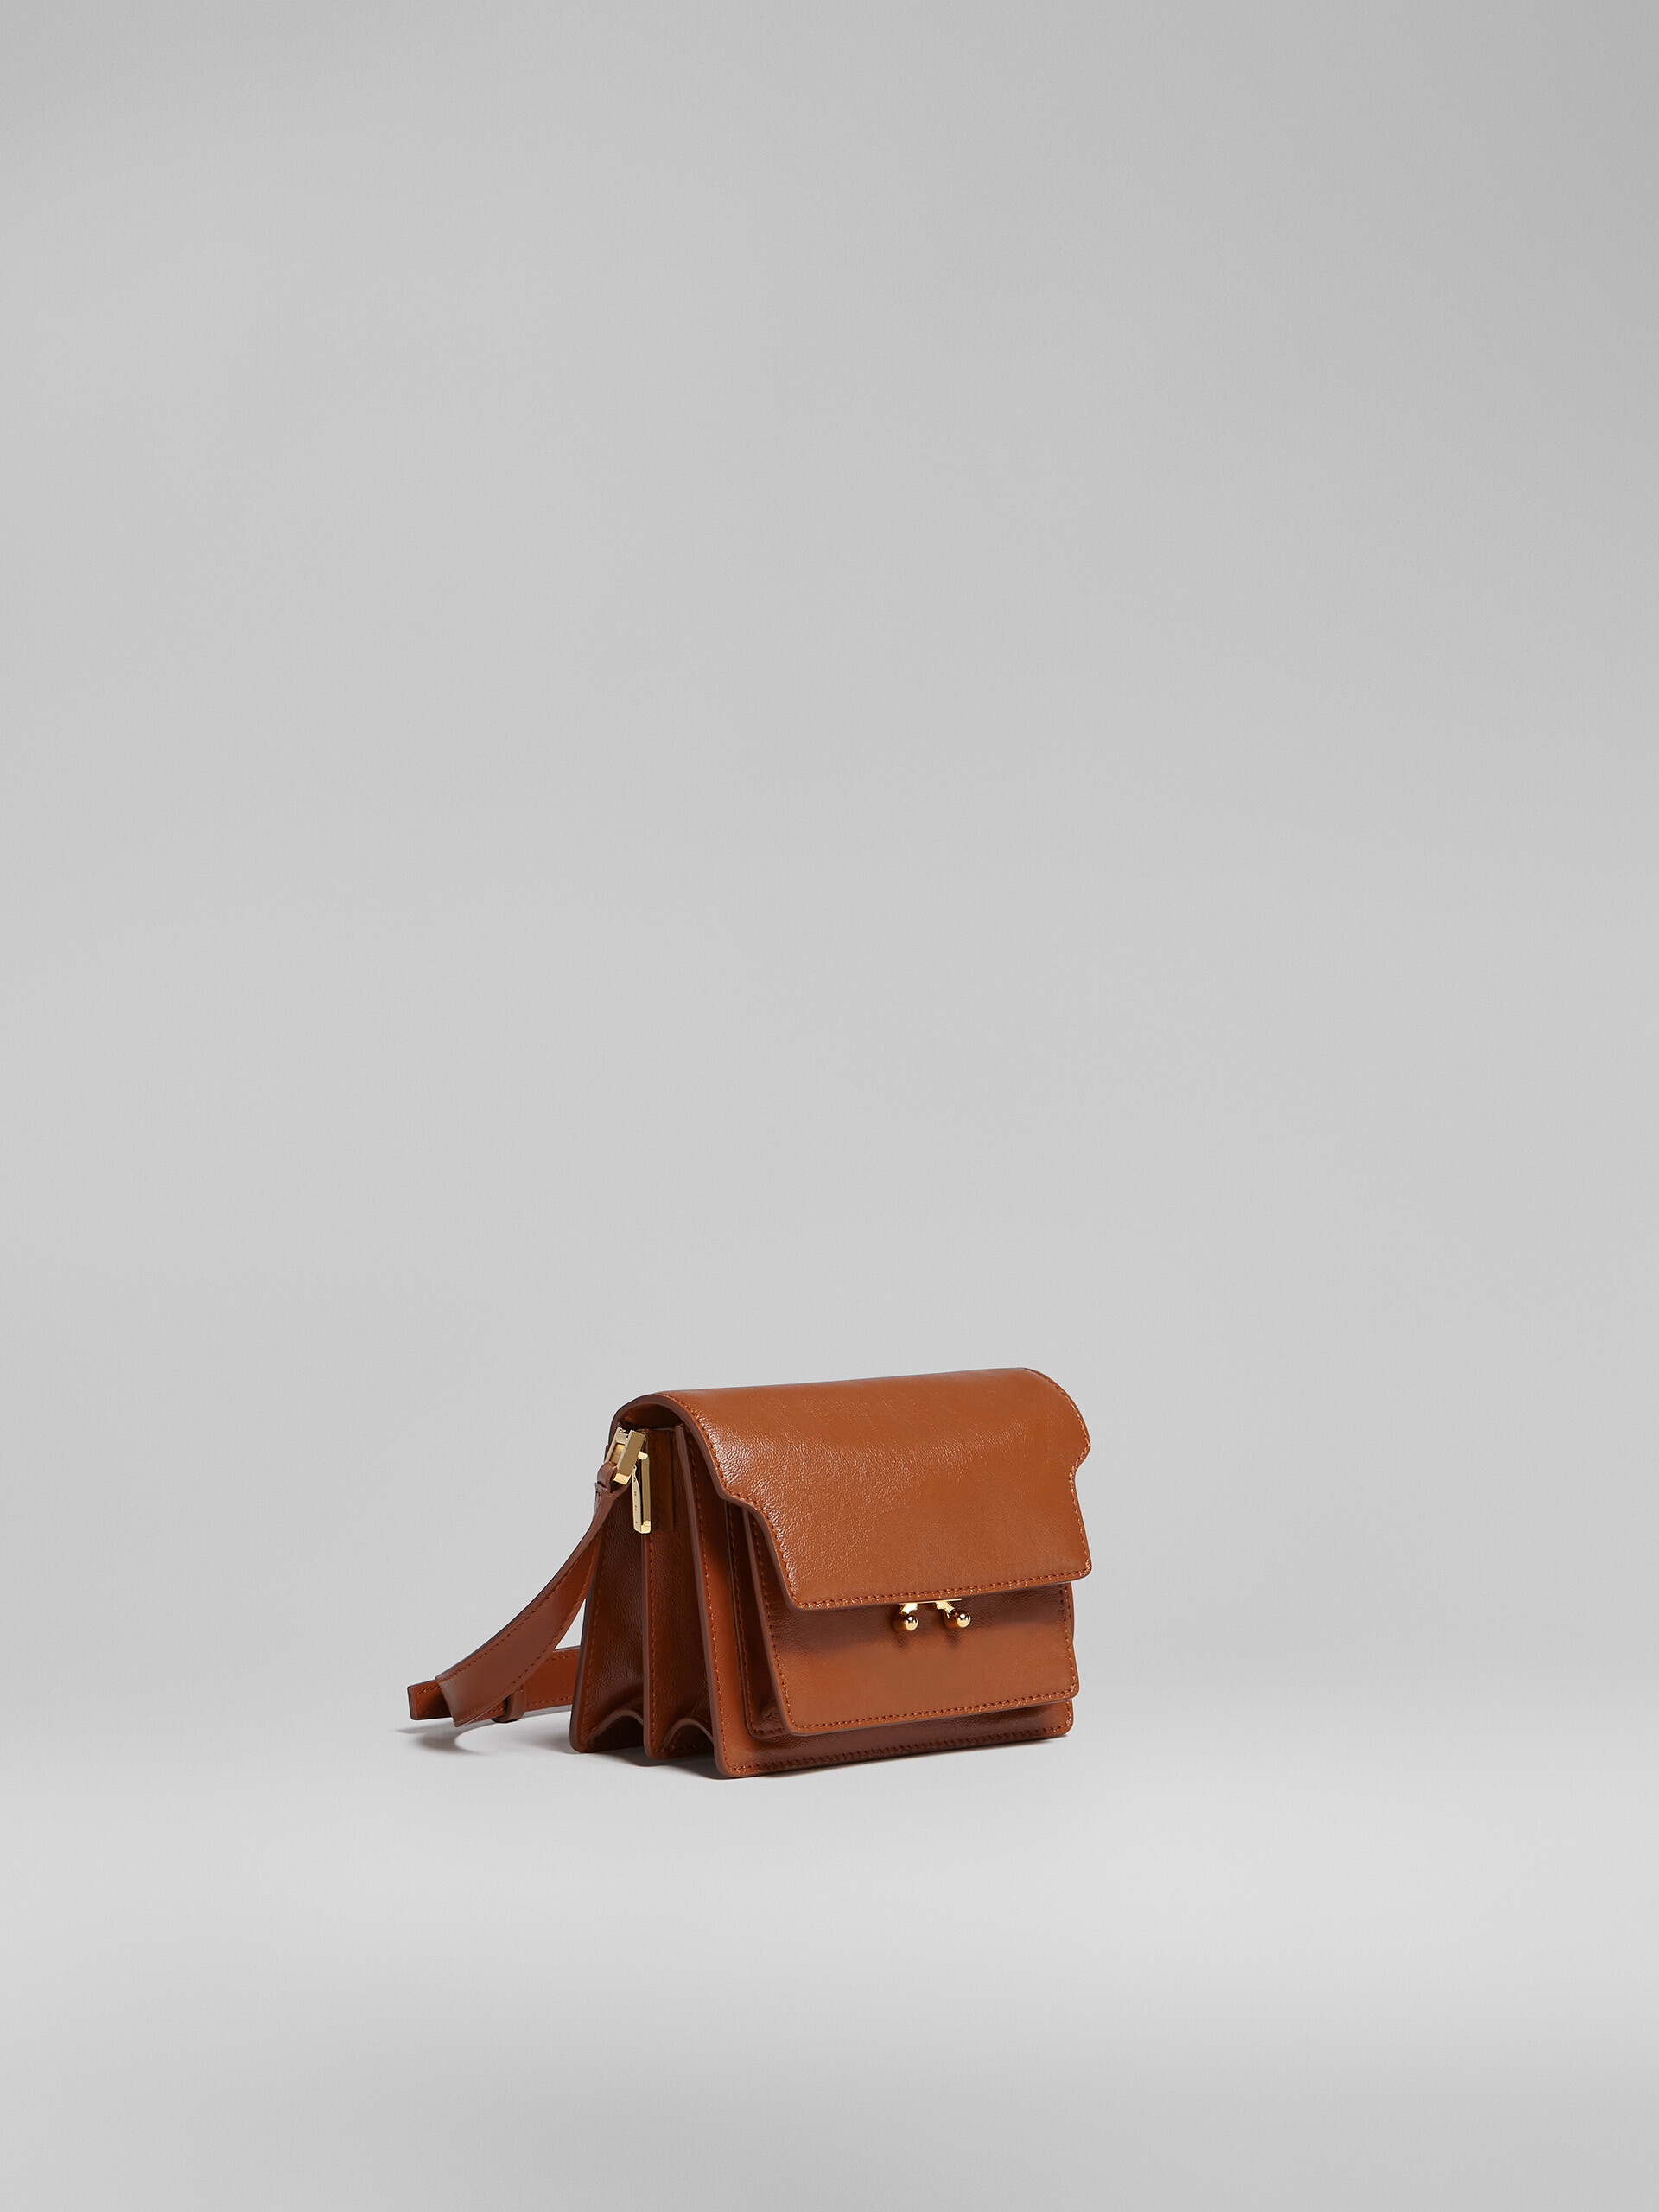 TRUNK SOFT mini bag in brown leather - Shoulder Bags - Image 6